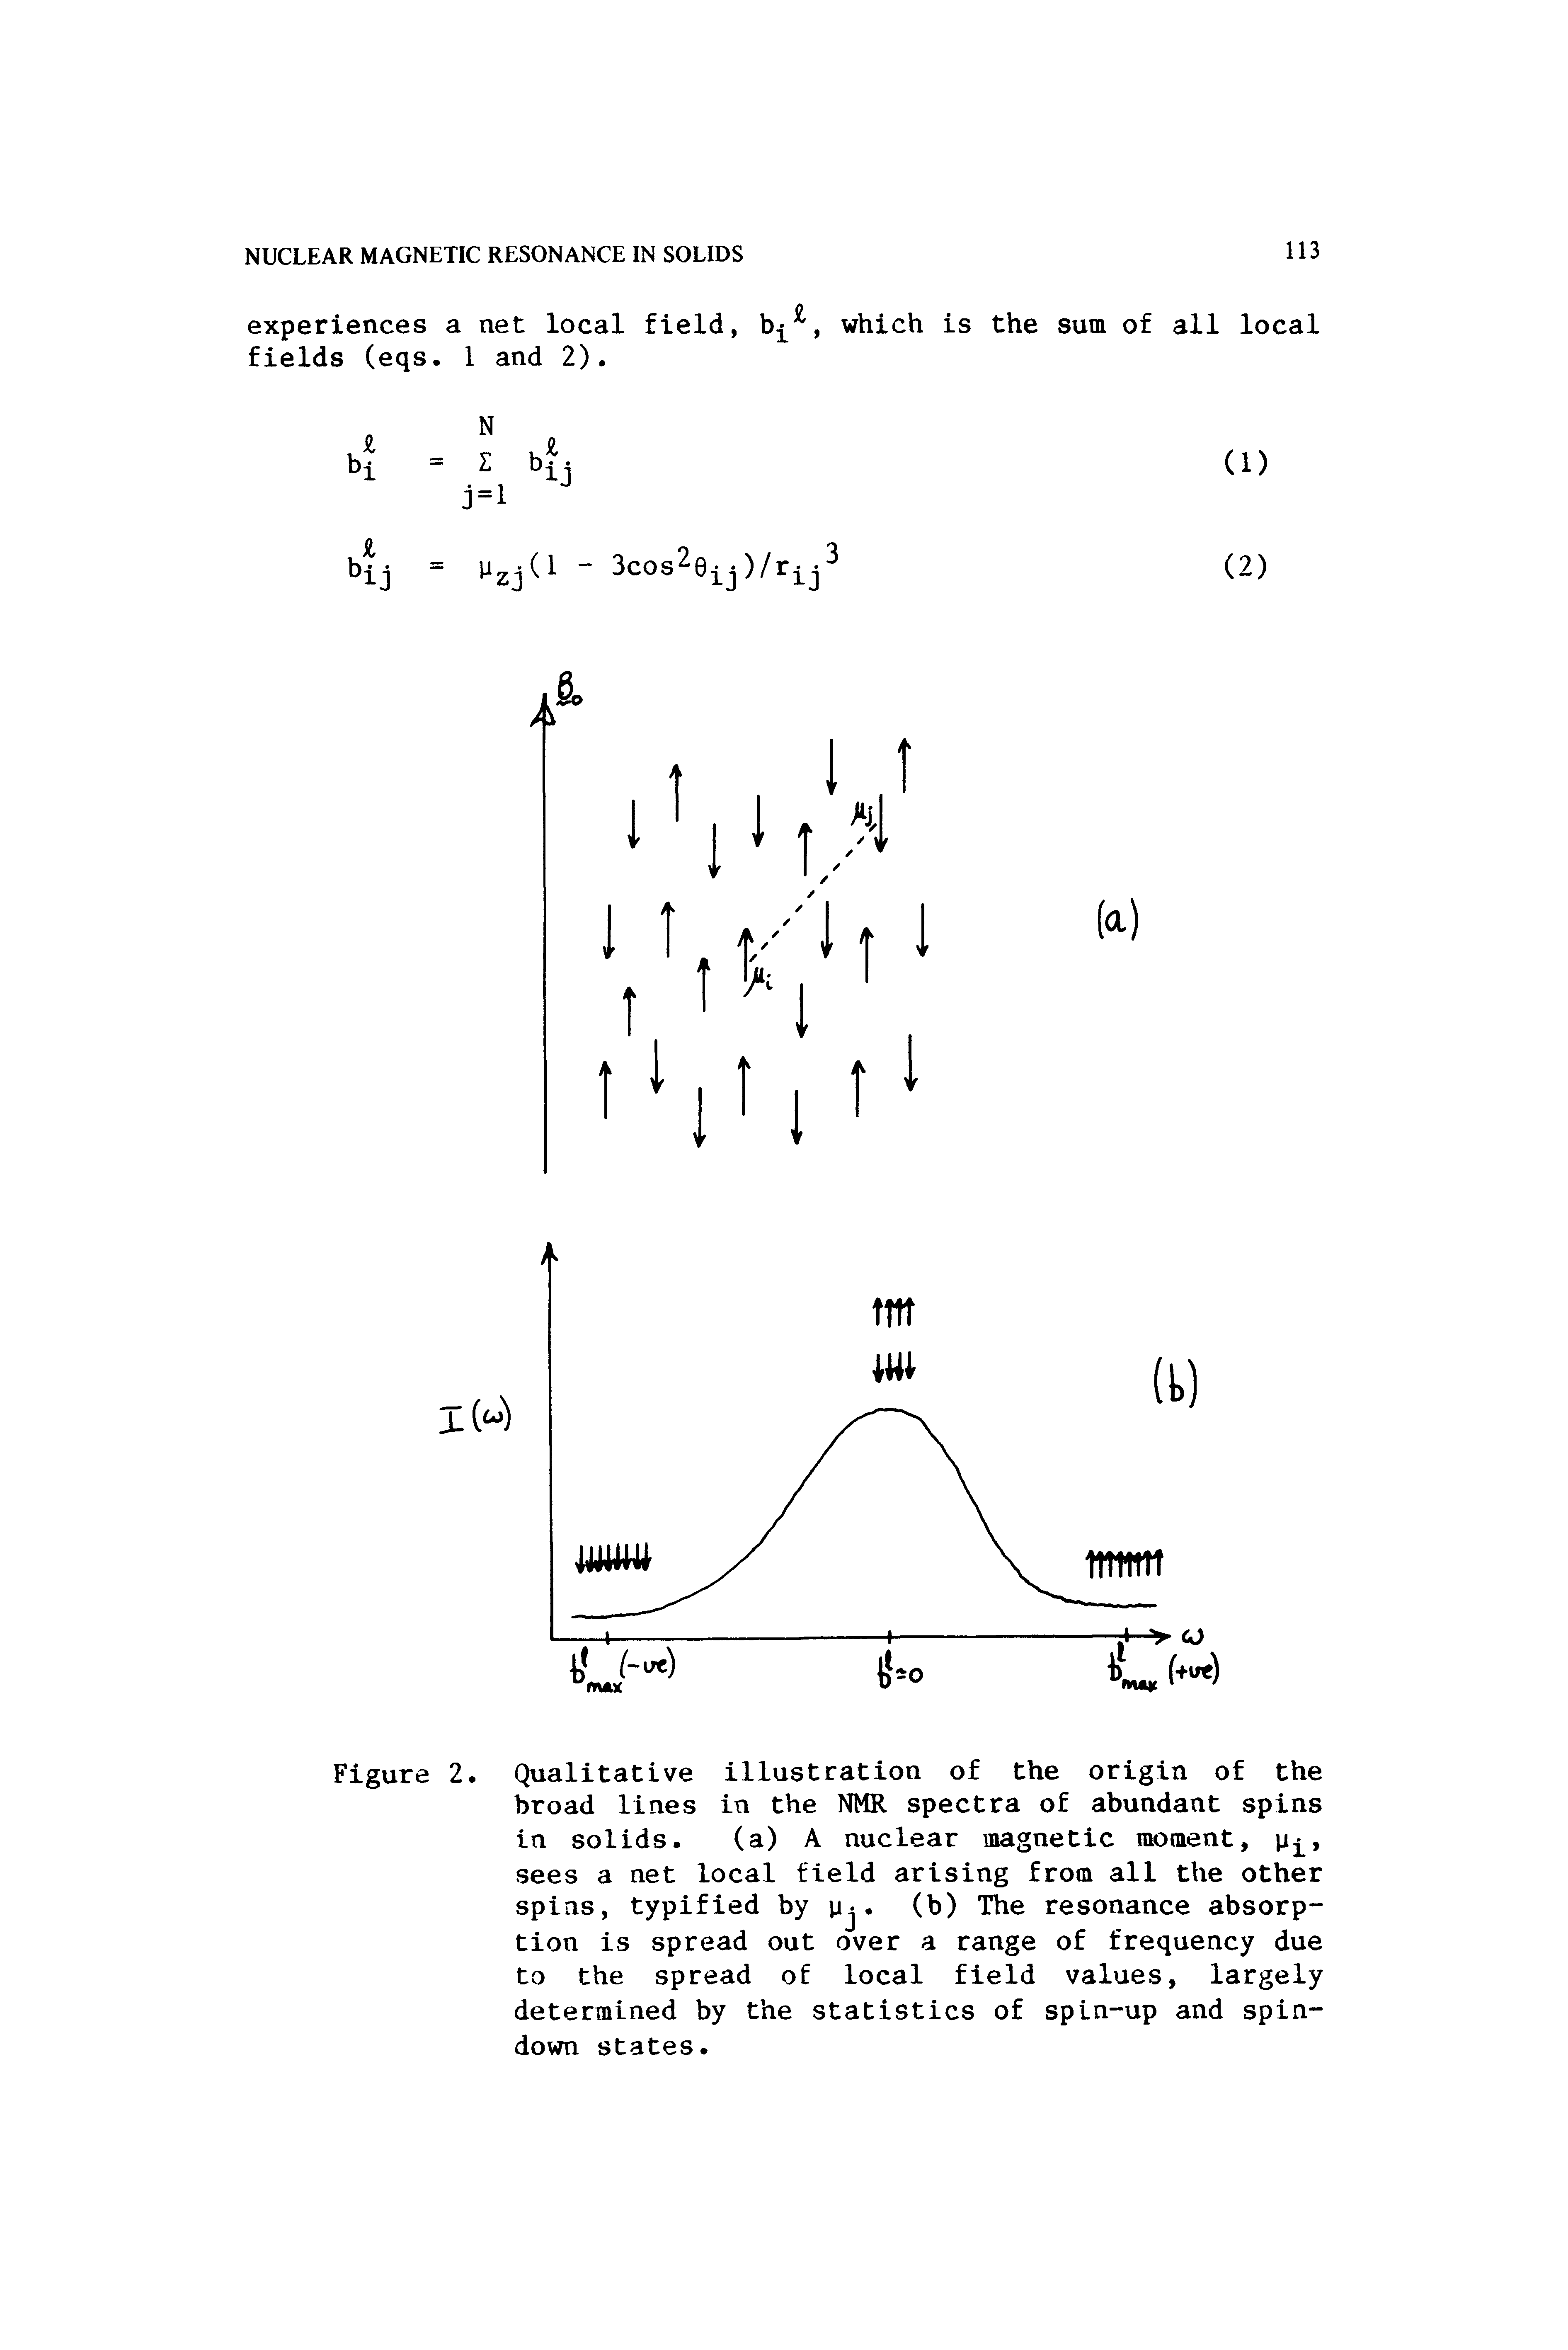 Figure 2. Qualitative illustration of the origin of the broad lines in the NMR spectra of abundant spins in solids. (a) A nuclear magnetic moment, sees a net local field arising from all the other spins, typified by iy (b) The resonance absorption is spread out over a range of frequency due to the spread of local field values, largely determined by the statistics of spin-up and spin-down states.